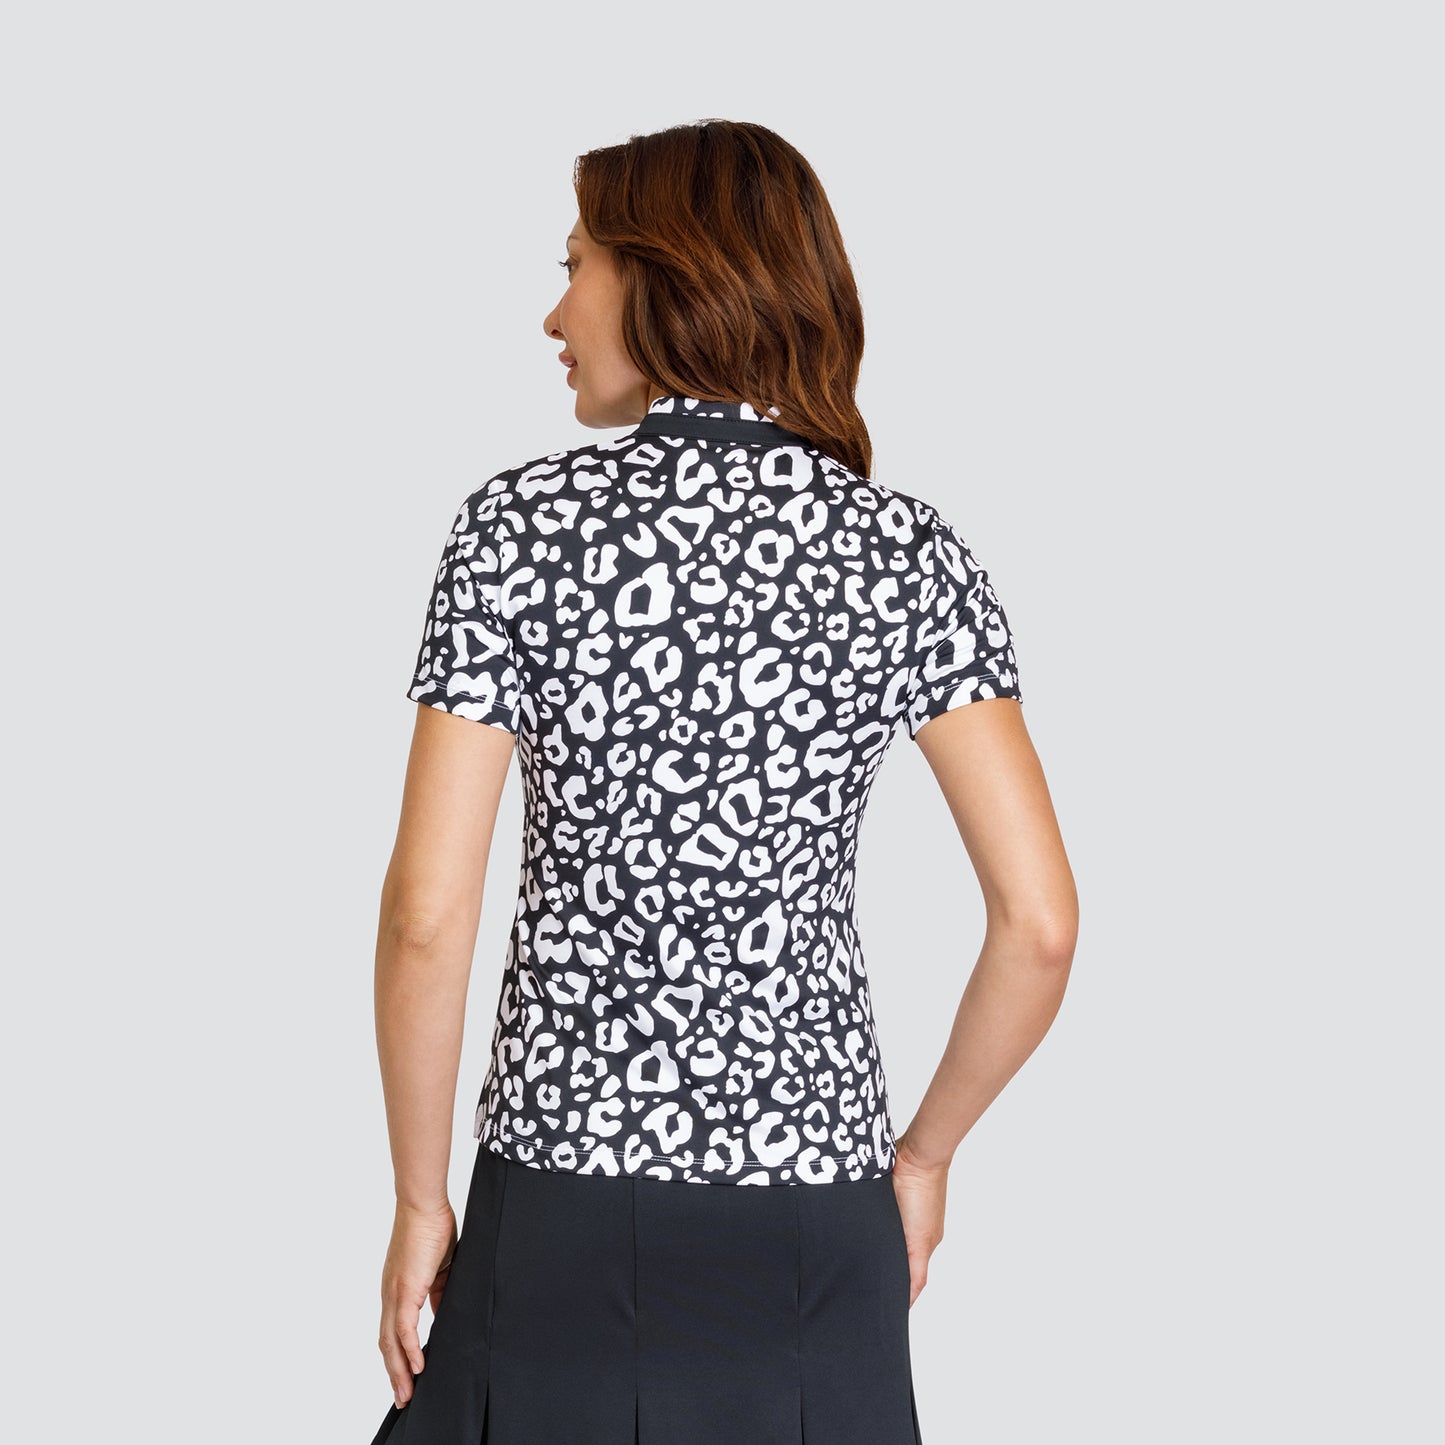 Tail Ladies Short Sleeve Polo in Panther